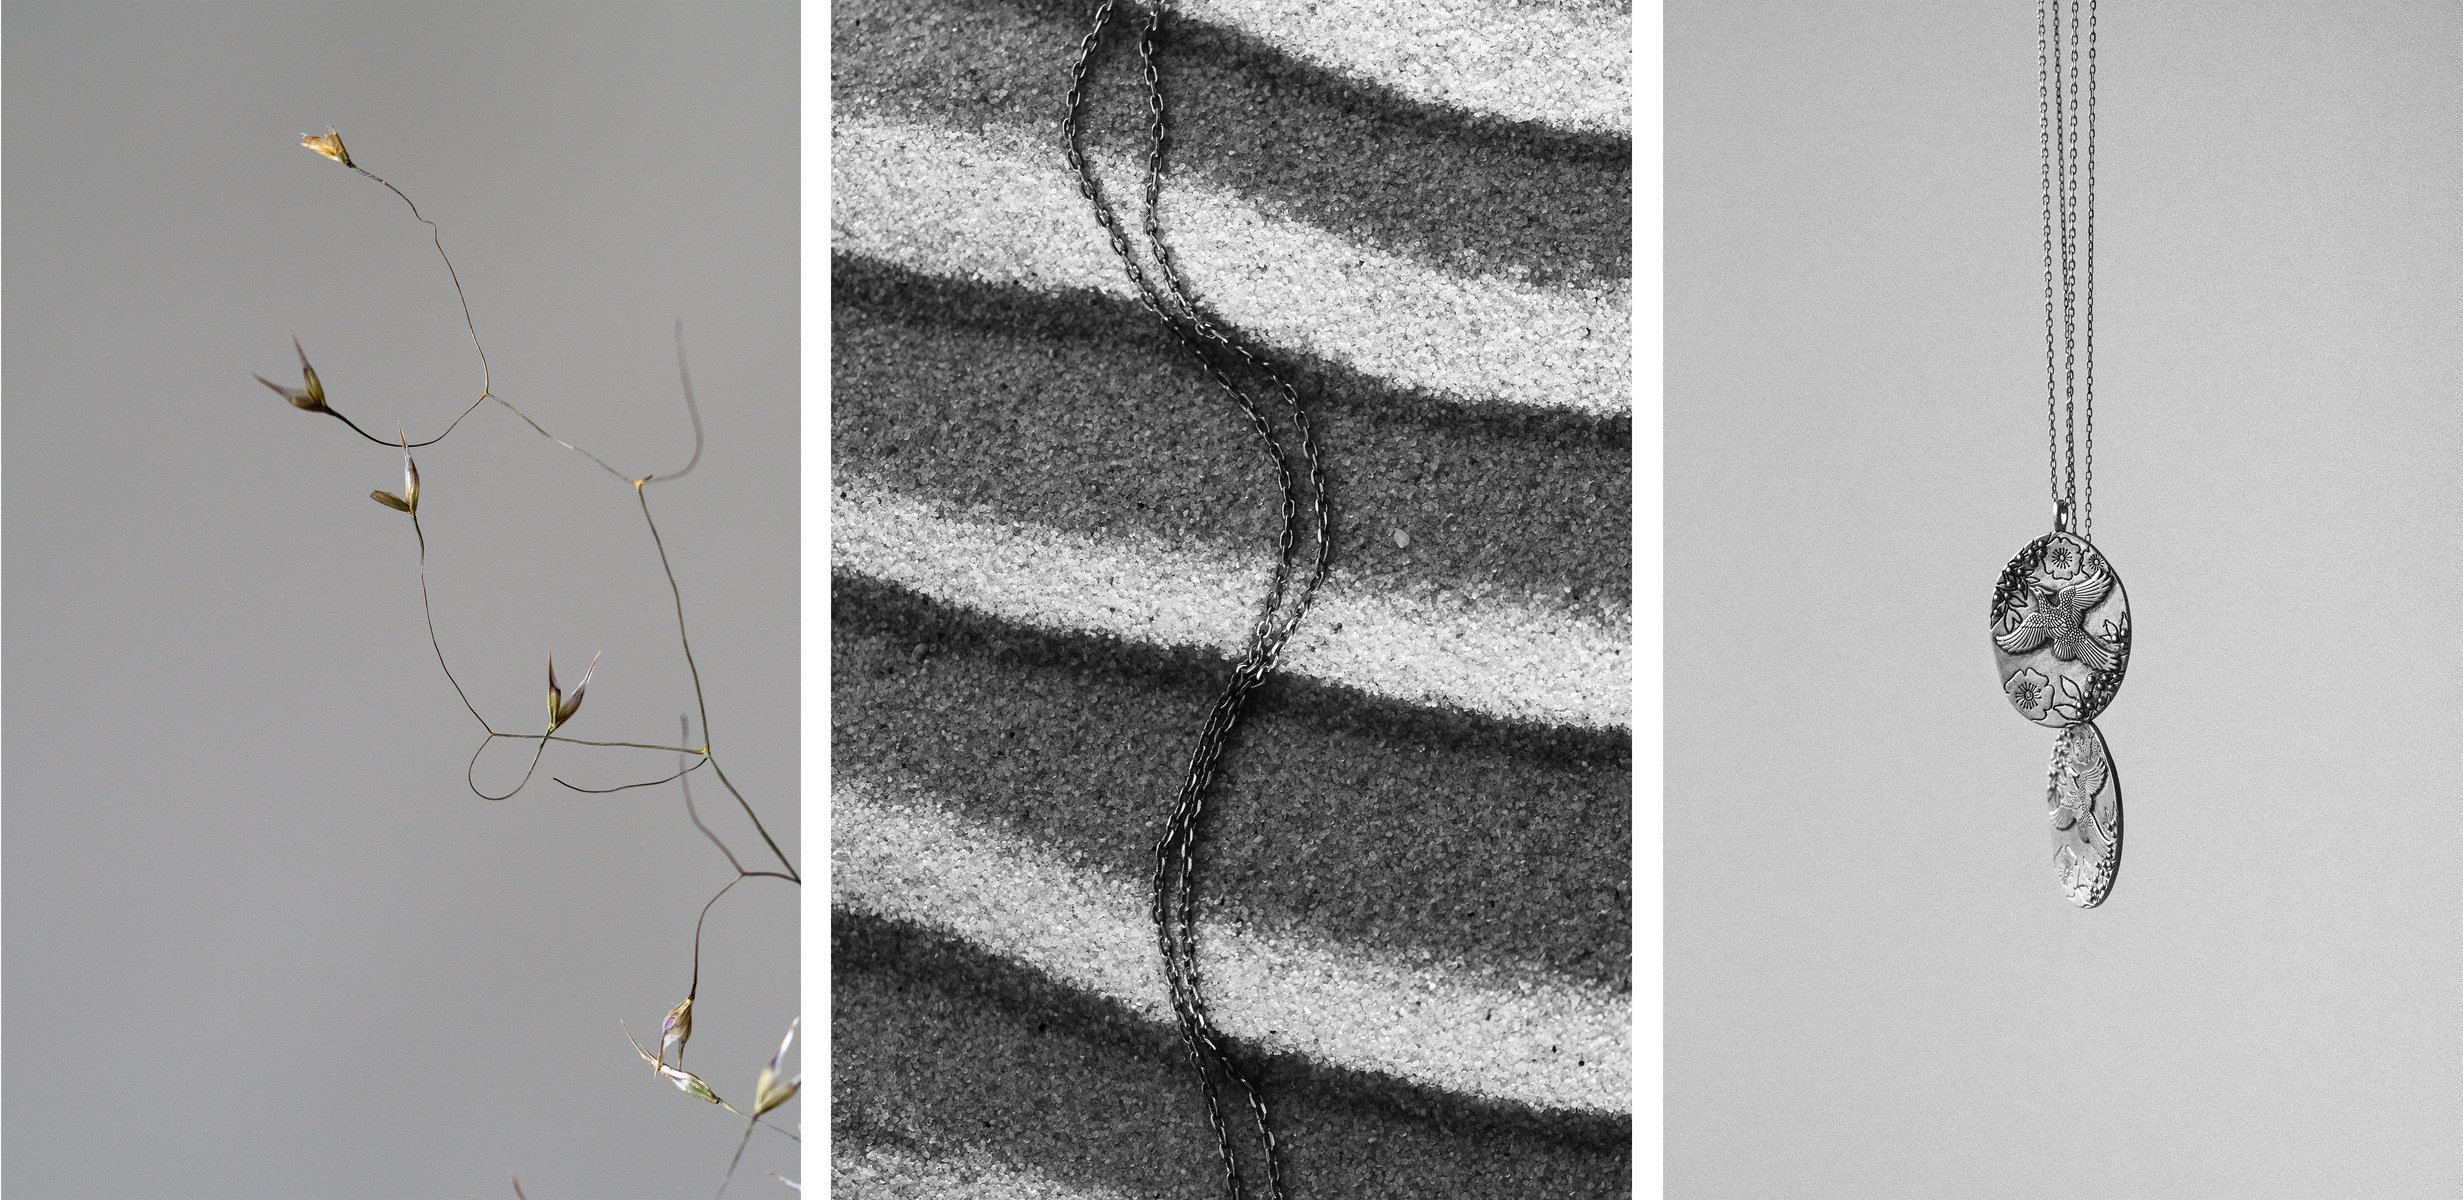  Triptych:

Left image: wispy, dried, yellow flower buds and stems against a grey background.

Center image: a black and white photo of a necklace chain stretched across harsh ripples of sand.

Right image: a black and white image of two ovular, metal eagle pendants hanging from thin chains against a grey background. by Sydney SG